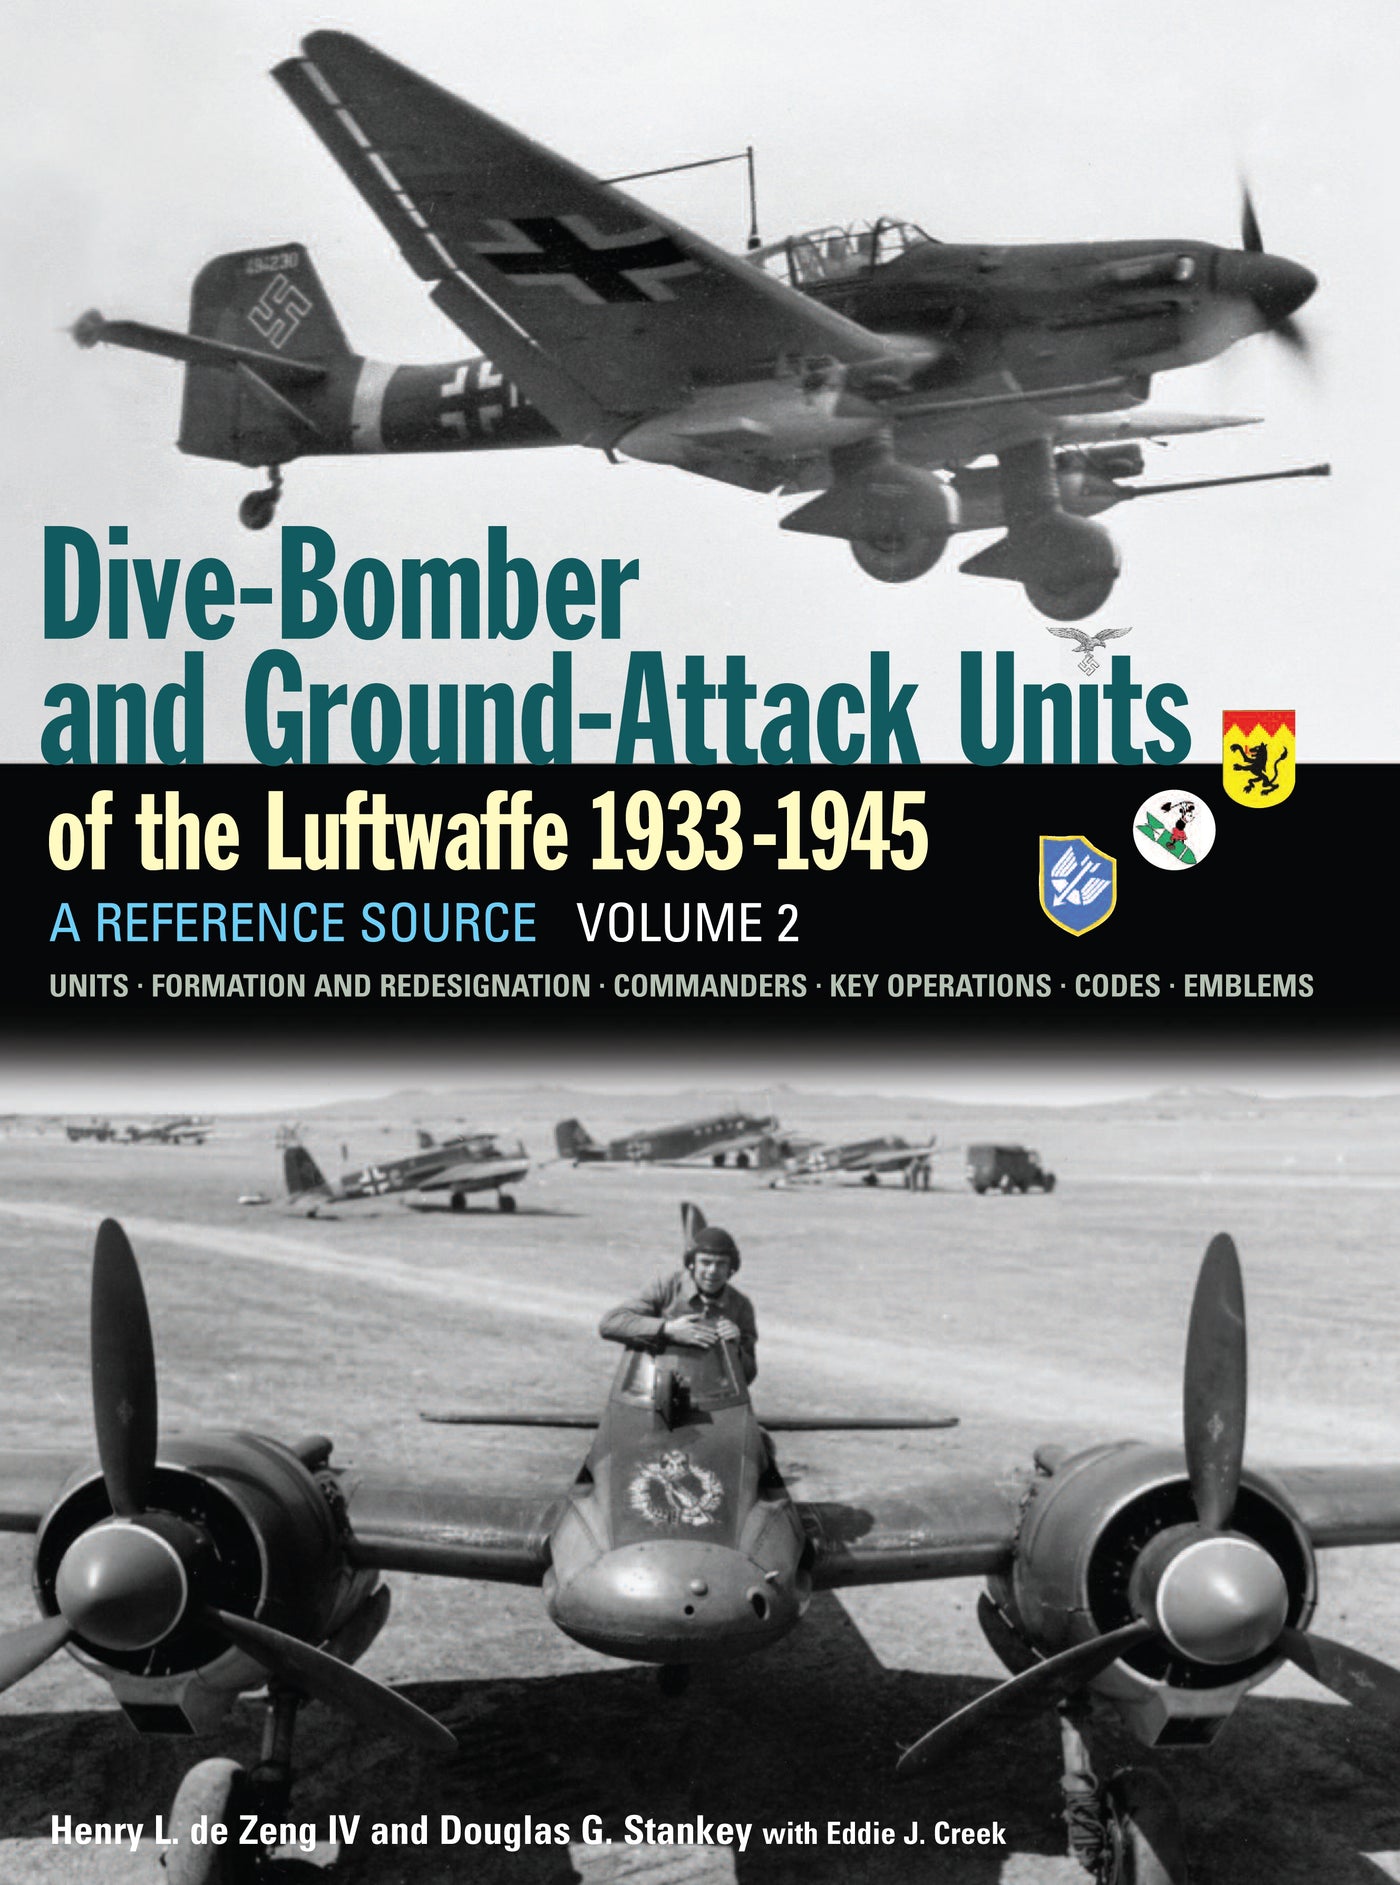 Dive Bomber and Ground Attack Units of the Luftwaffe 1933-45 Volume 2